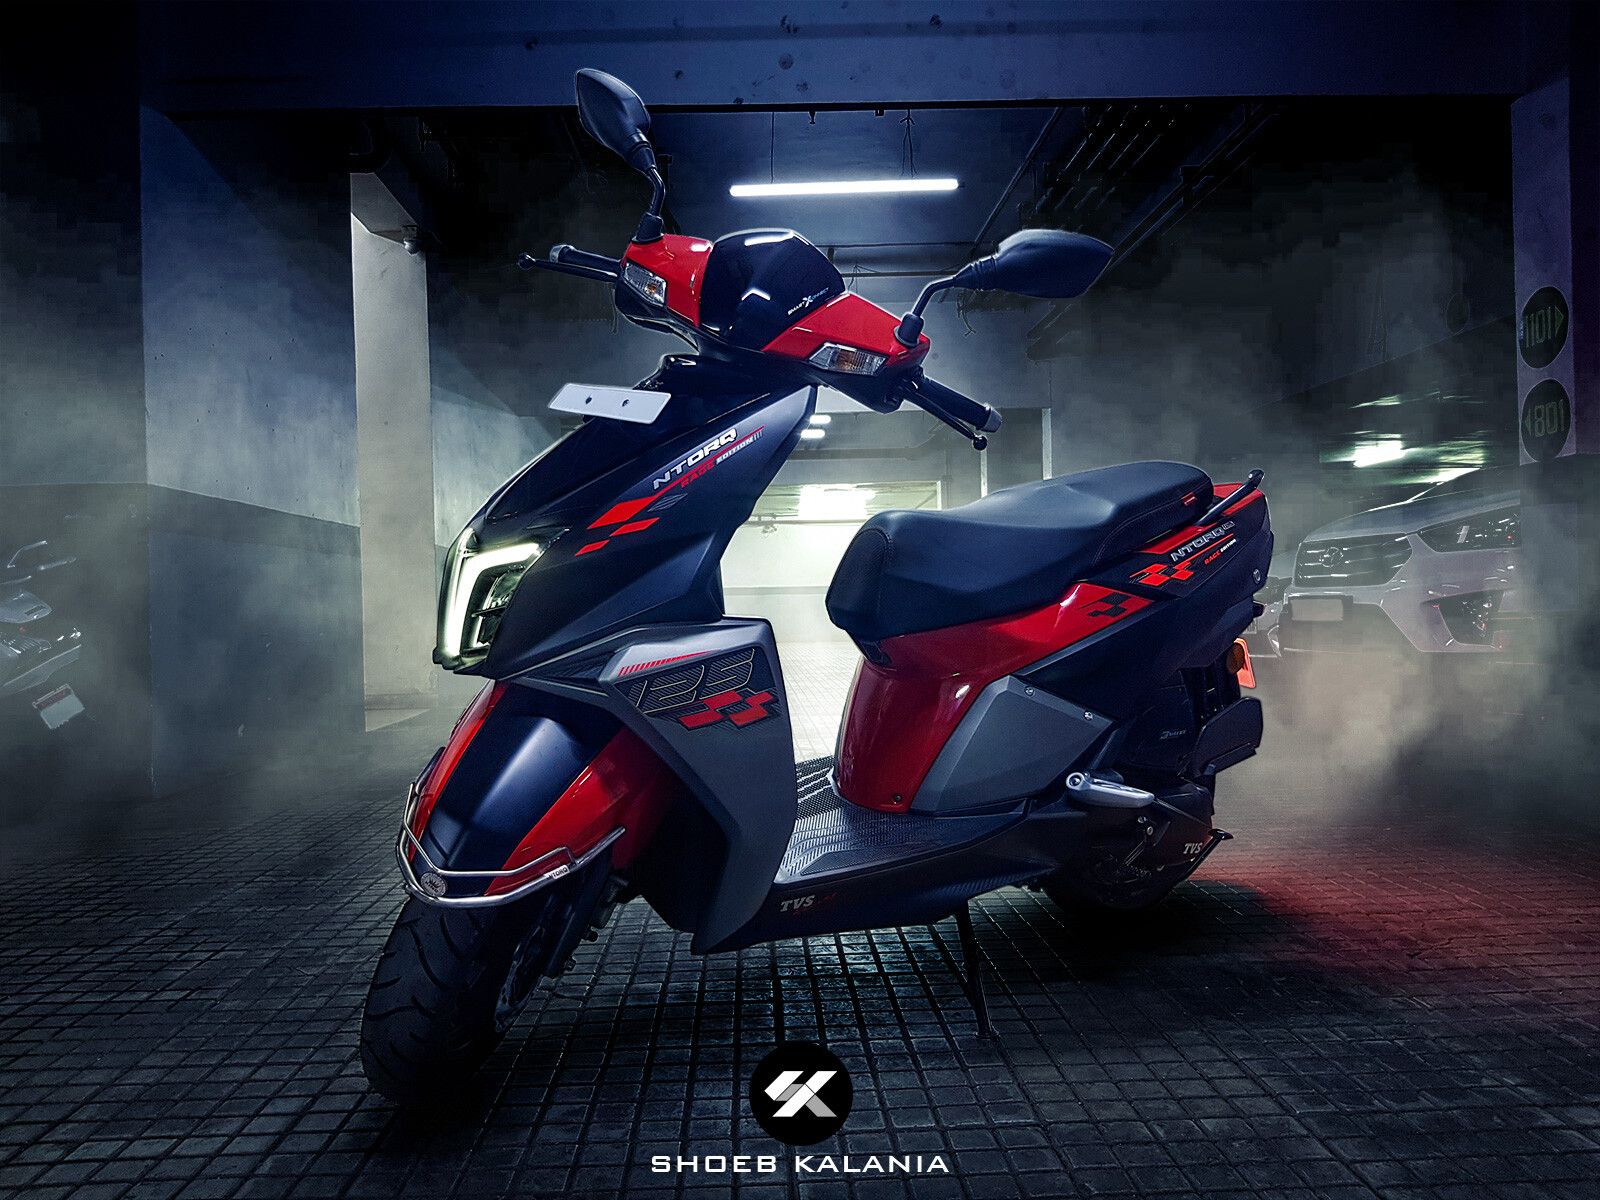 TVS NTorq 125 Race XP Launched! Generates More Power & Torque!